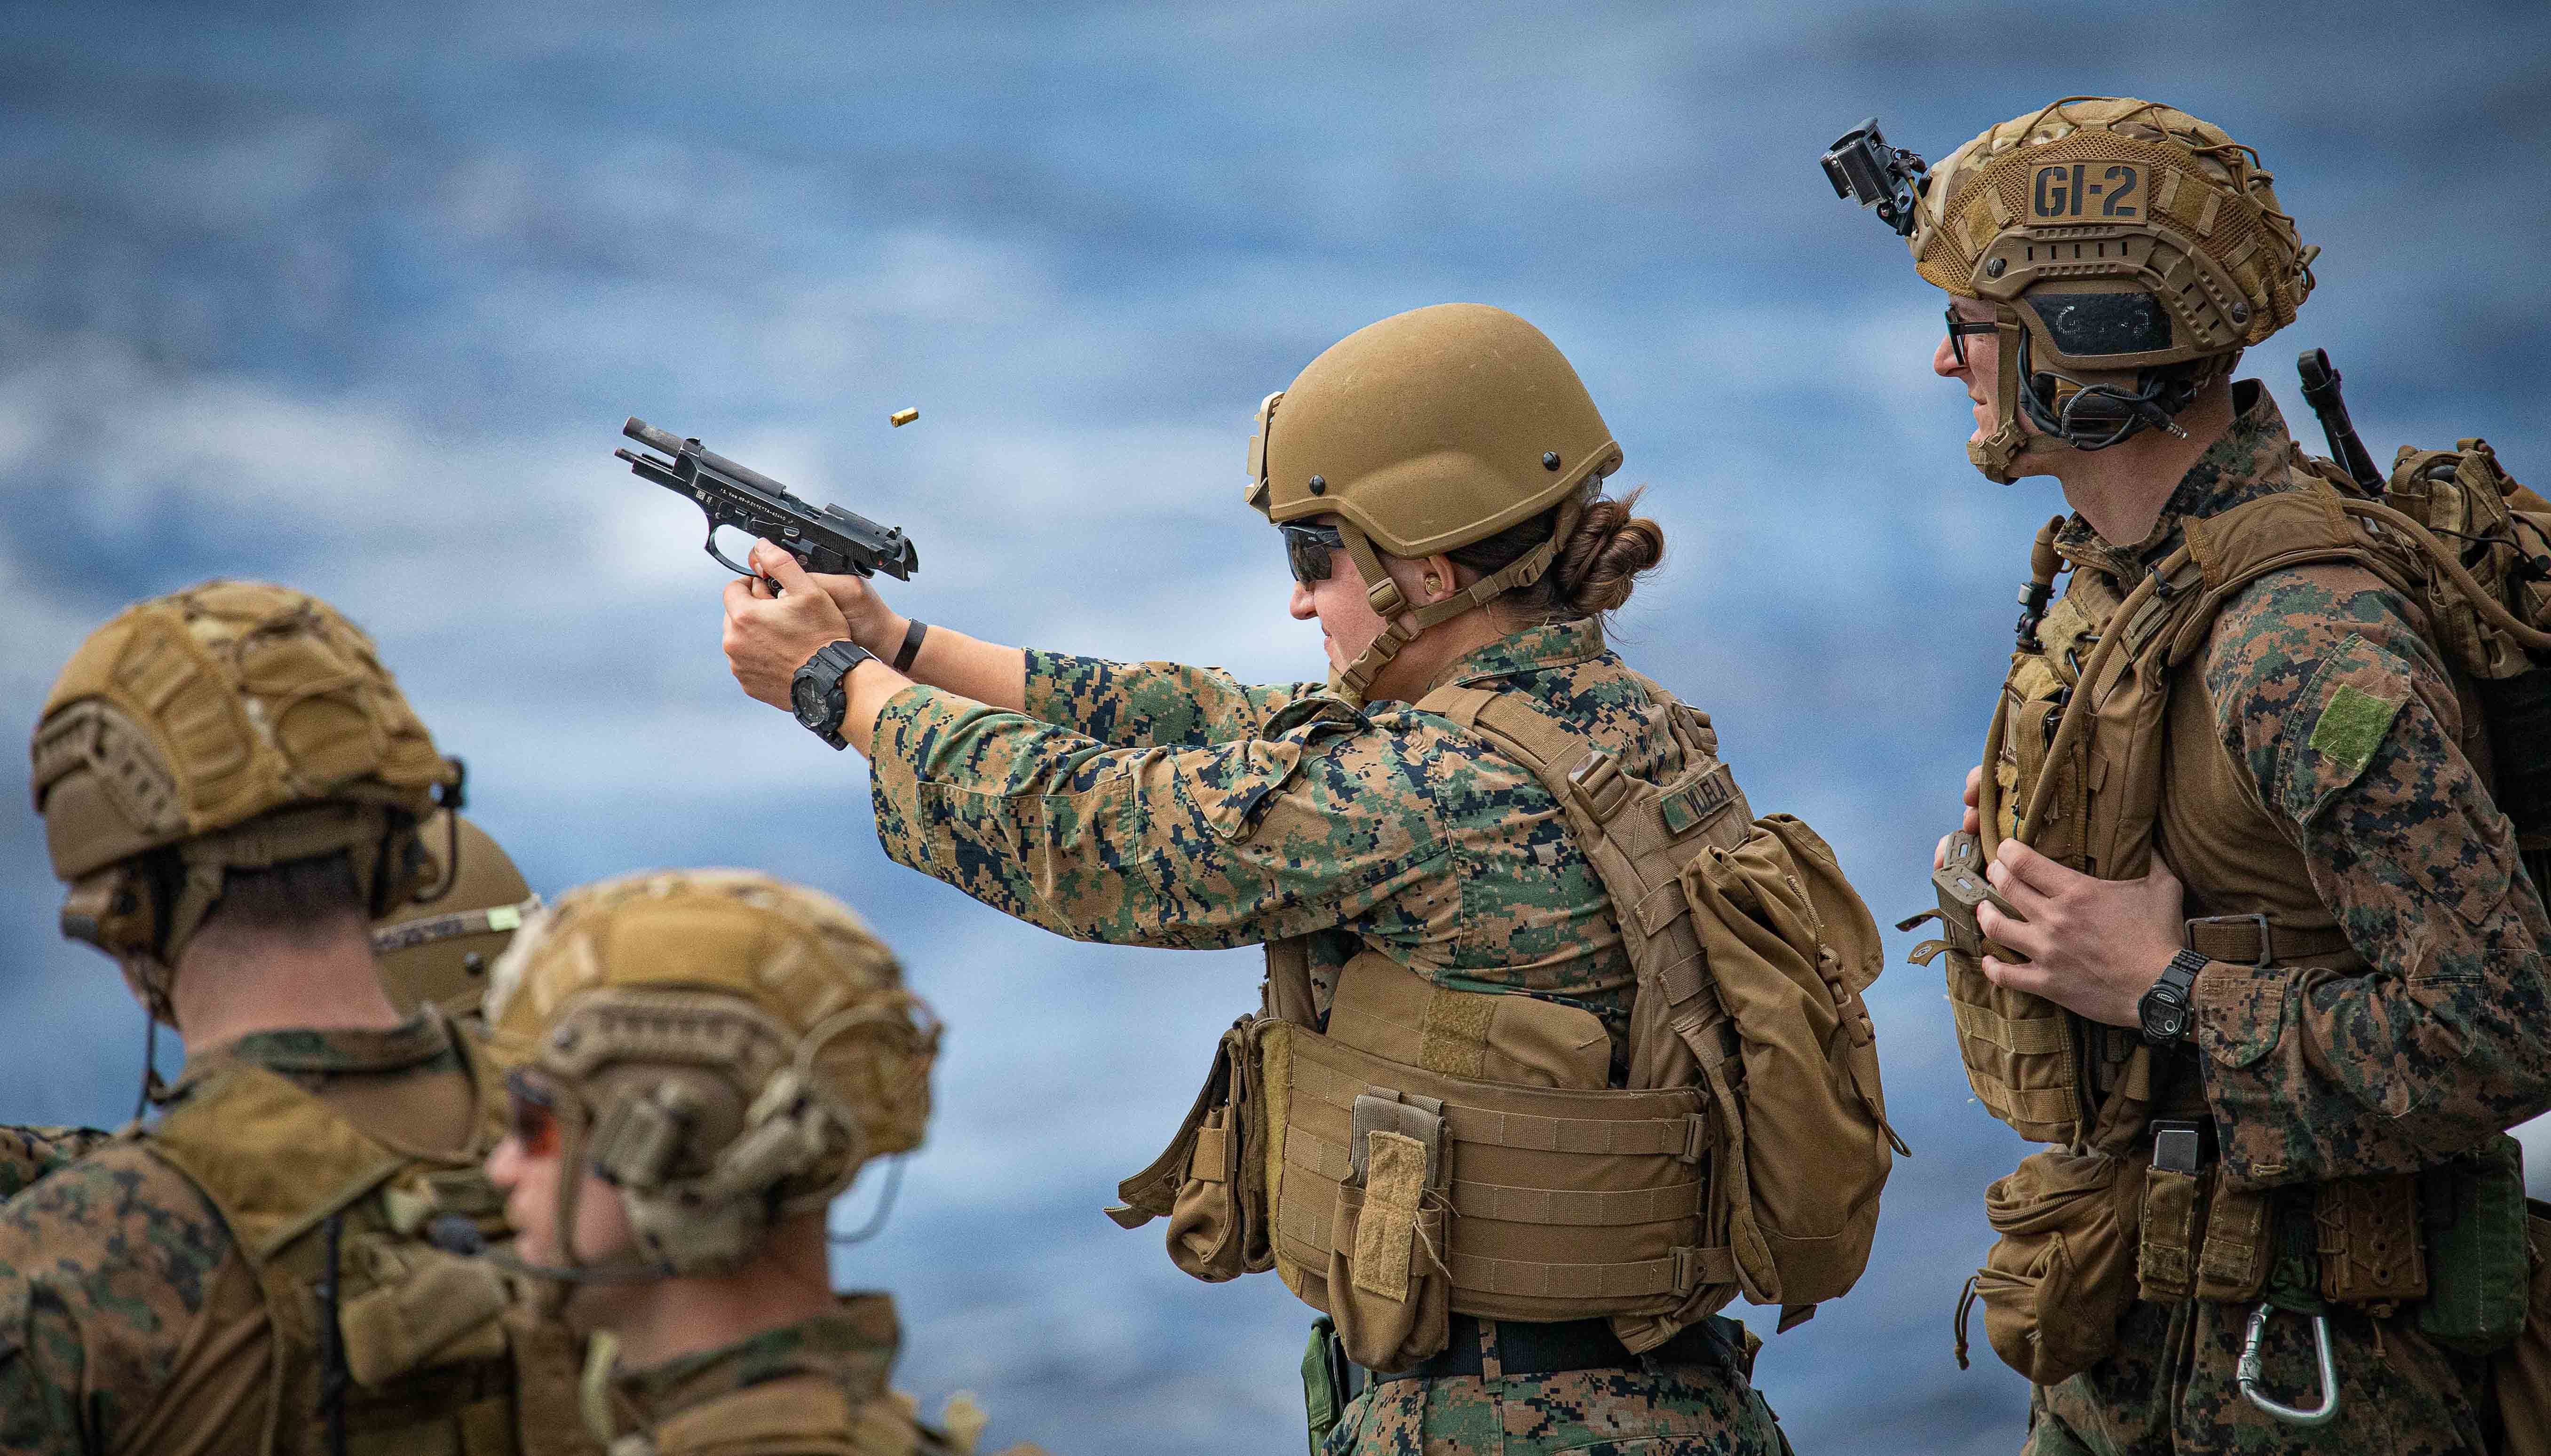 Uss Bataan Marines 26th Meu Heading To Middle East Amid Tensions With Iran Usni News 